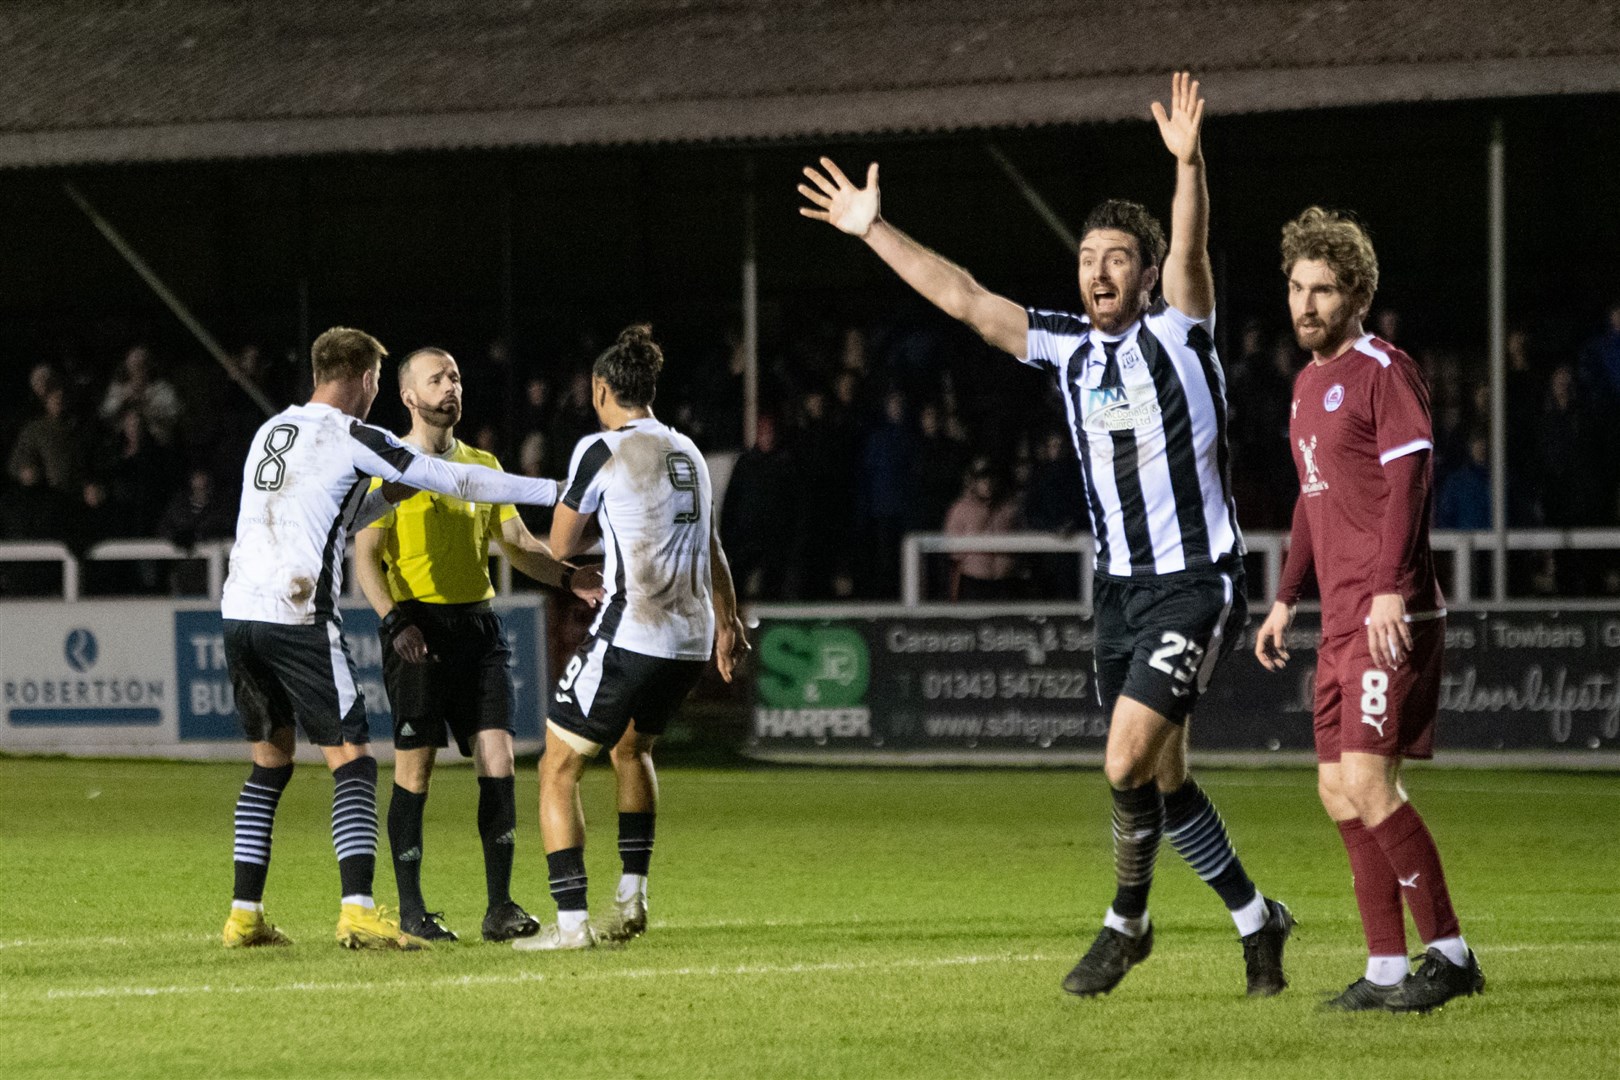 The Elgin City team cannot believe referee George Calder has missed a handball on the Clyde goal line. ..Elgin City FC (2) vs Clyde FC (1) - SPFL League Two 2023/24 - Boroigh Briggs, Elgin 30/01/2024...Picture: Daniel Forsyth..